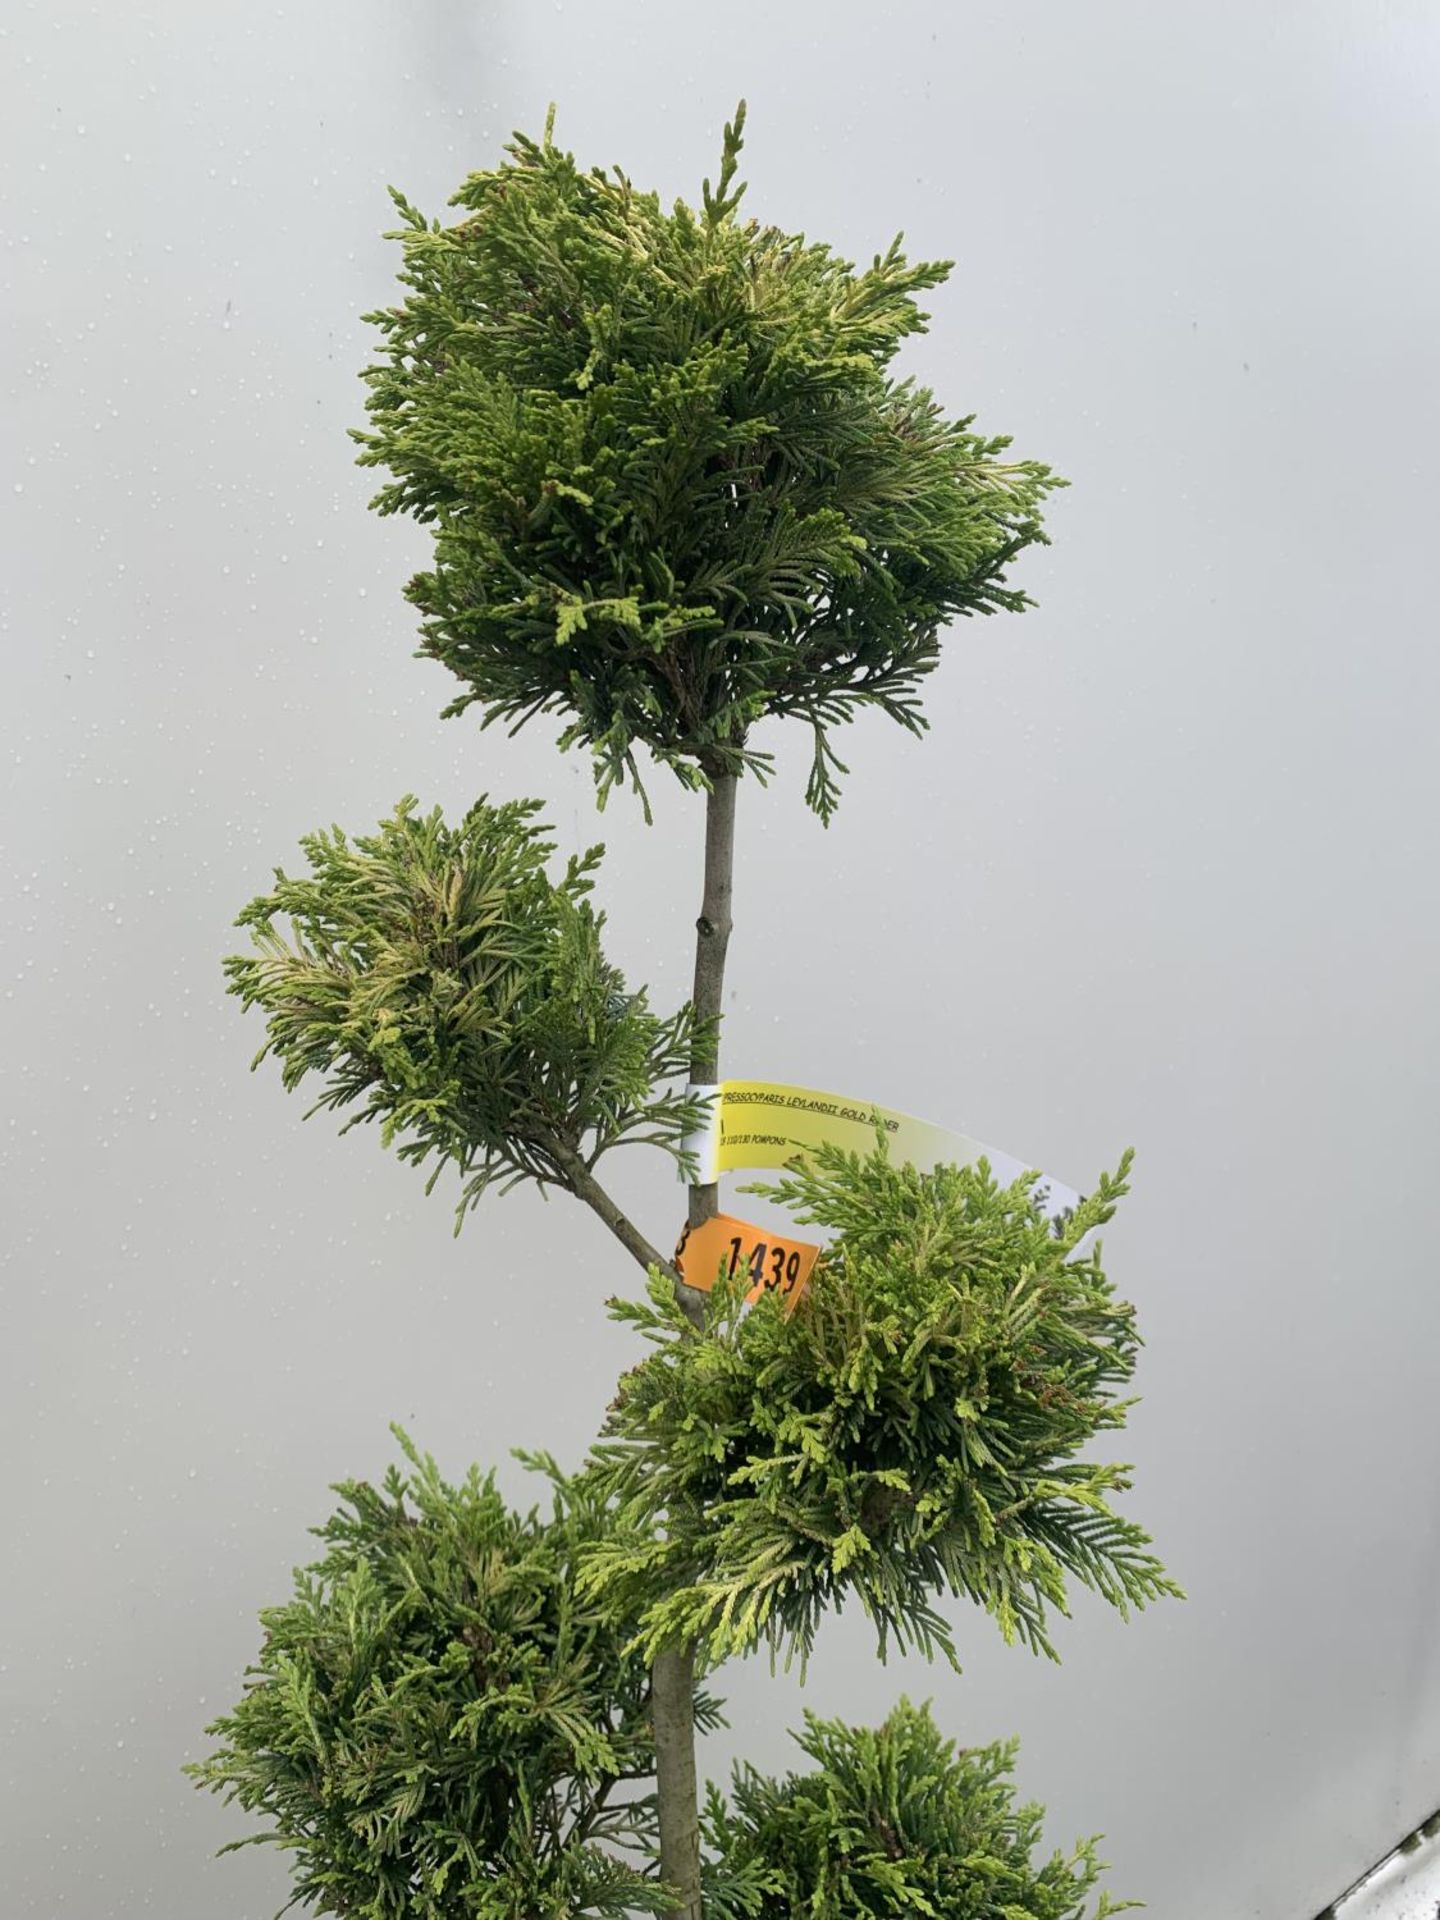 TWO POM POM TREES CUPRESSOCYPARIS LEYLANDII 'GOLD RIDER' APPROX 150CM IN HEIGHT IN 15 LTR POTS - Image 6 of 6